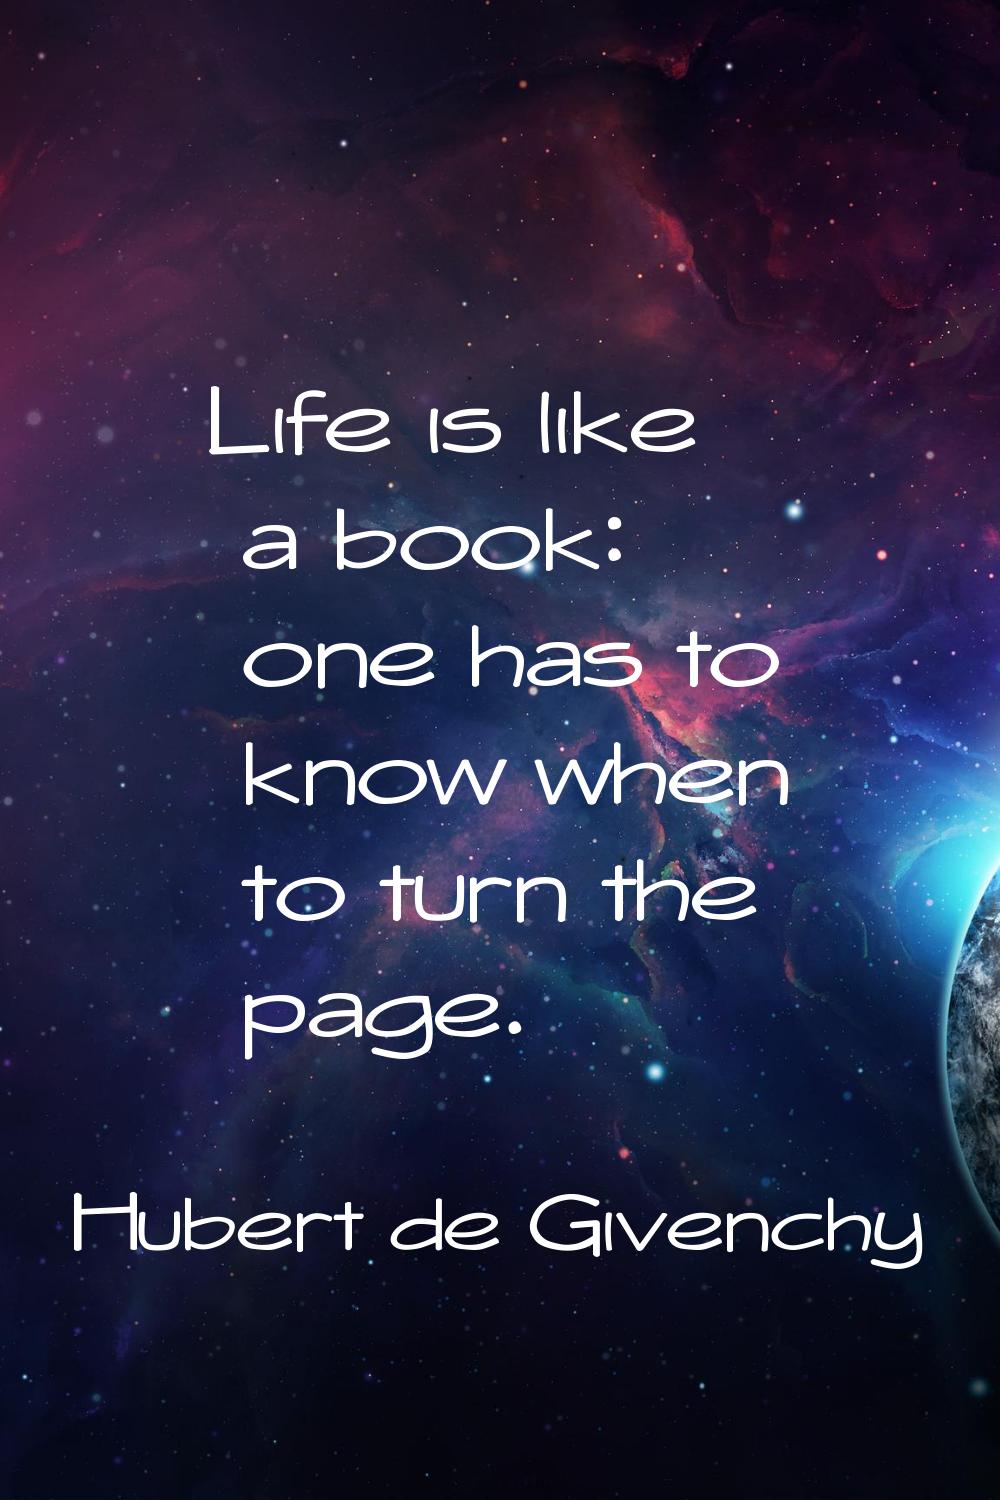 Life is like a book: one has to know when to turn the page.